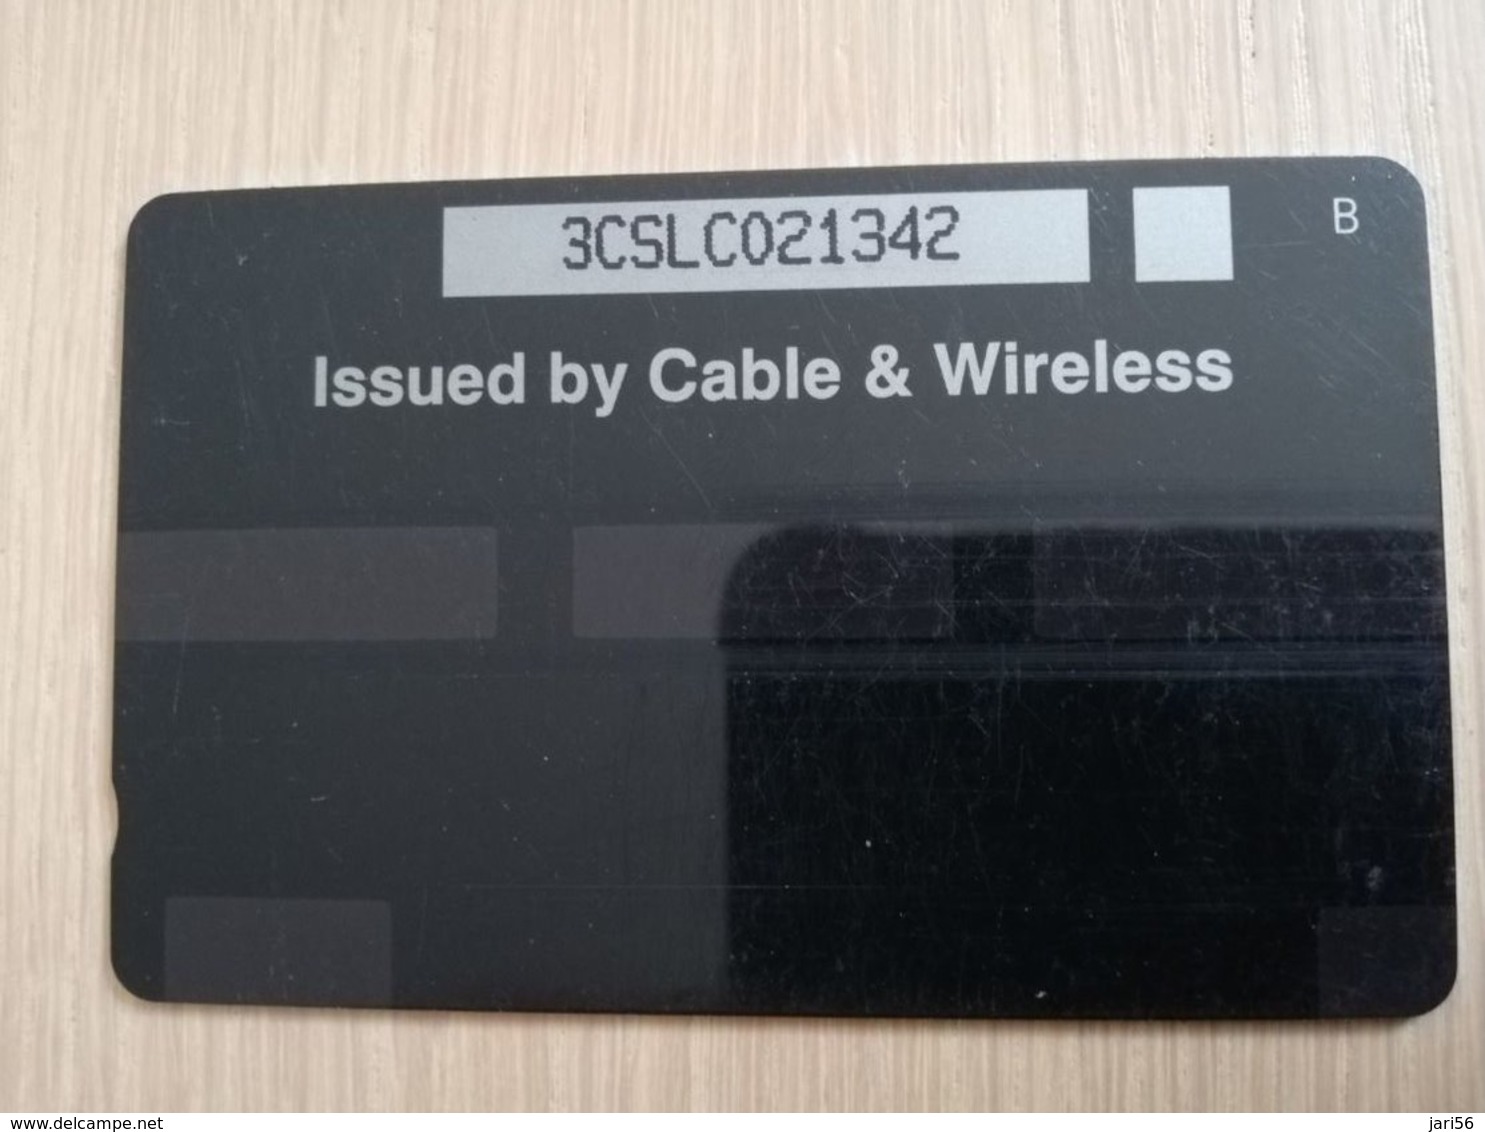 ST LUCIA    $ 40  CABLE & WIRELESS  STL-3C   3CSLC  Fine Used Card ** 2385** - St. Lucia